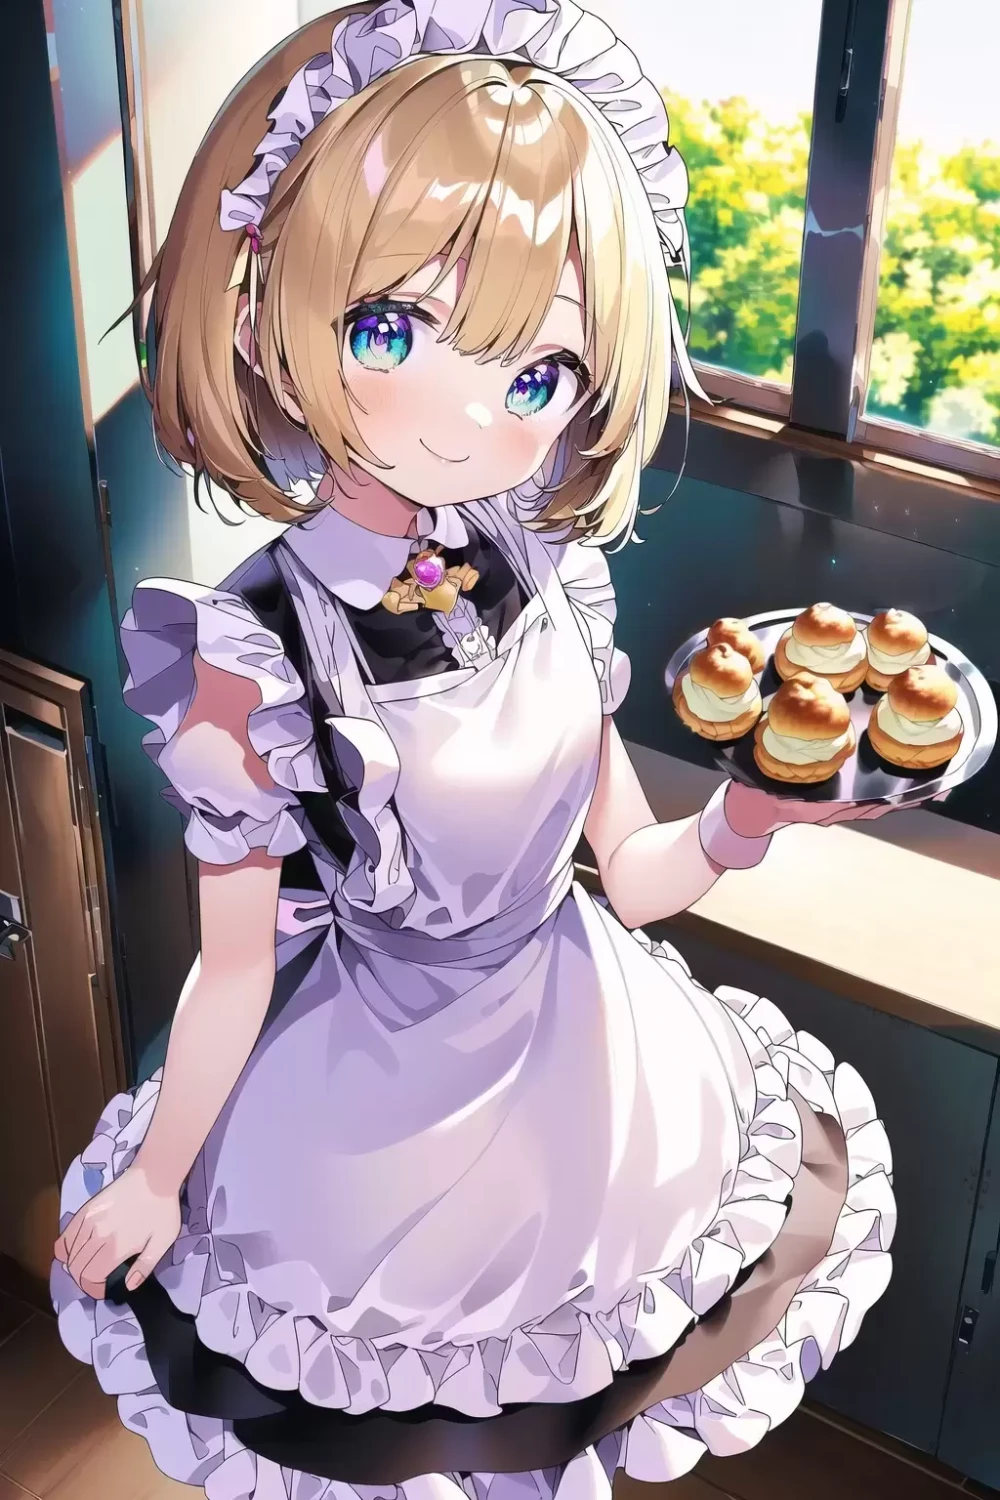 maid-anime-style-all-ages-7